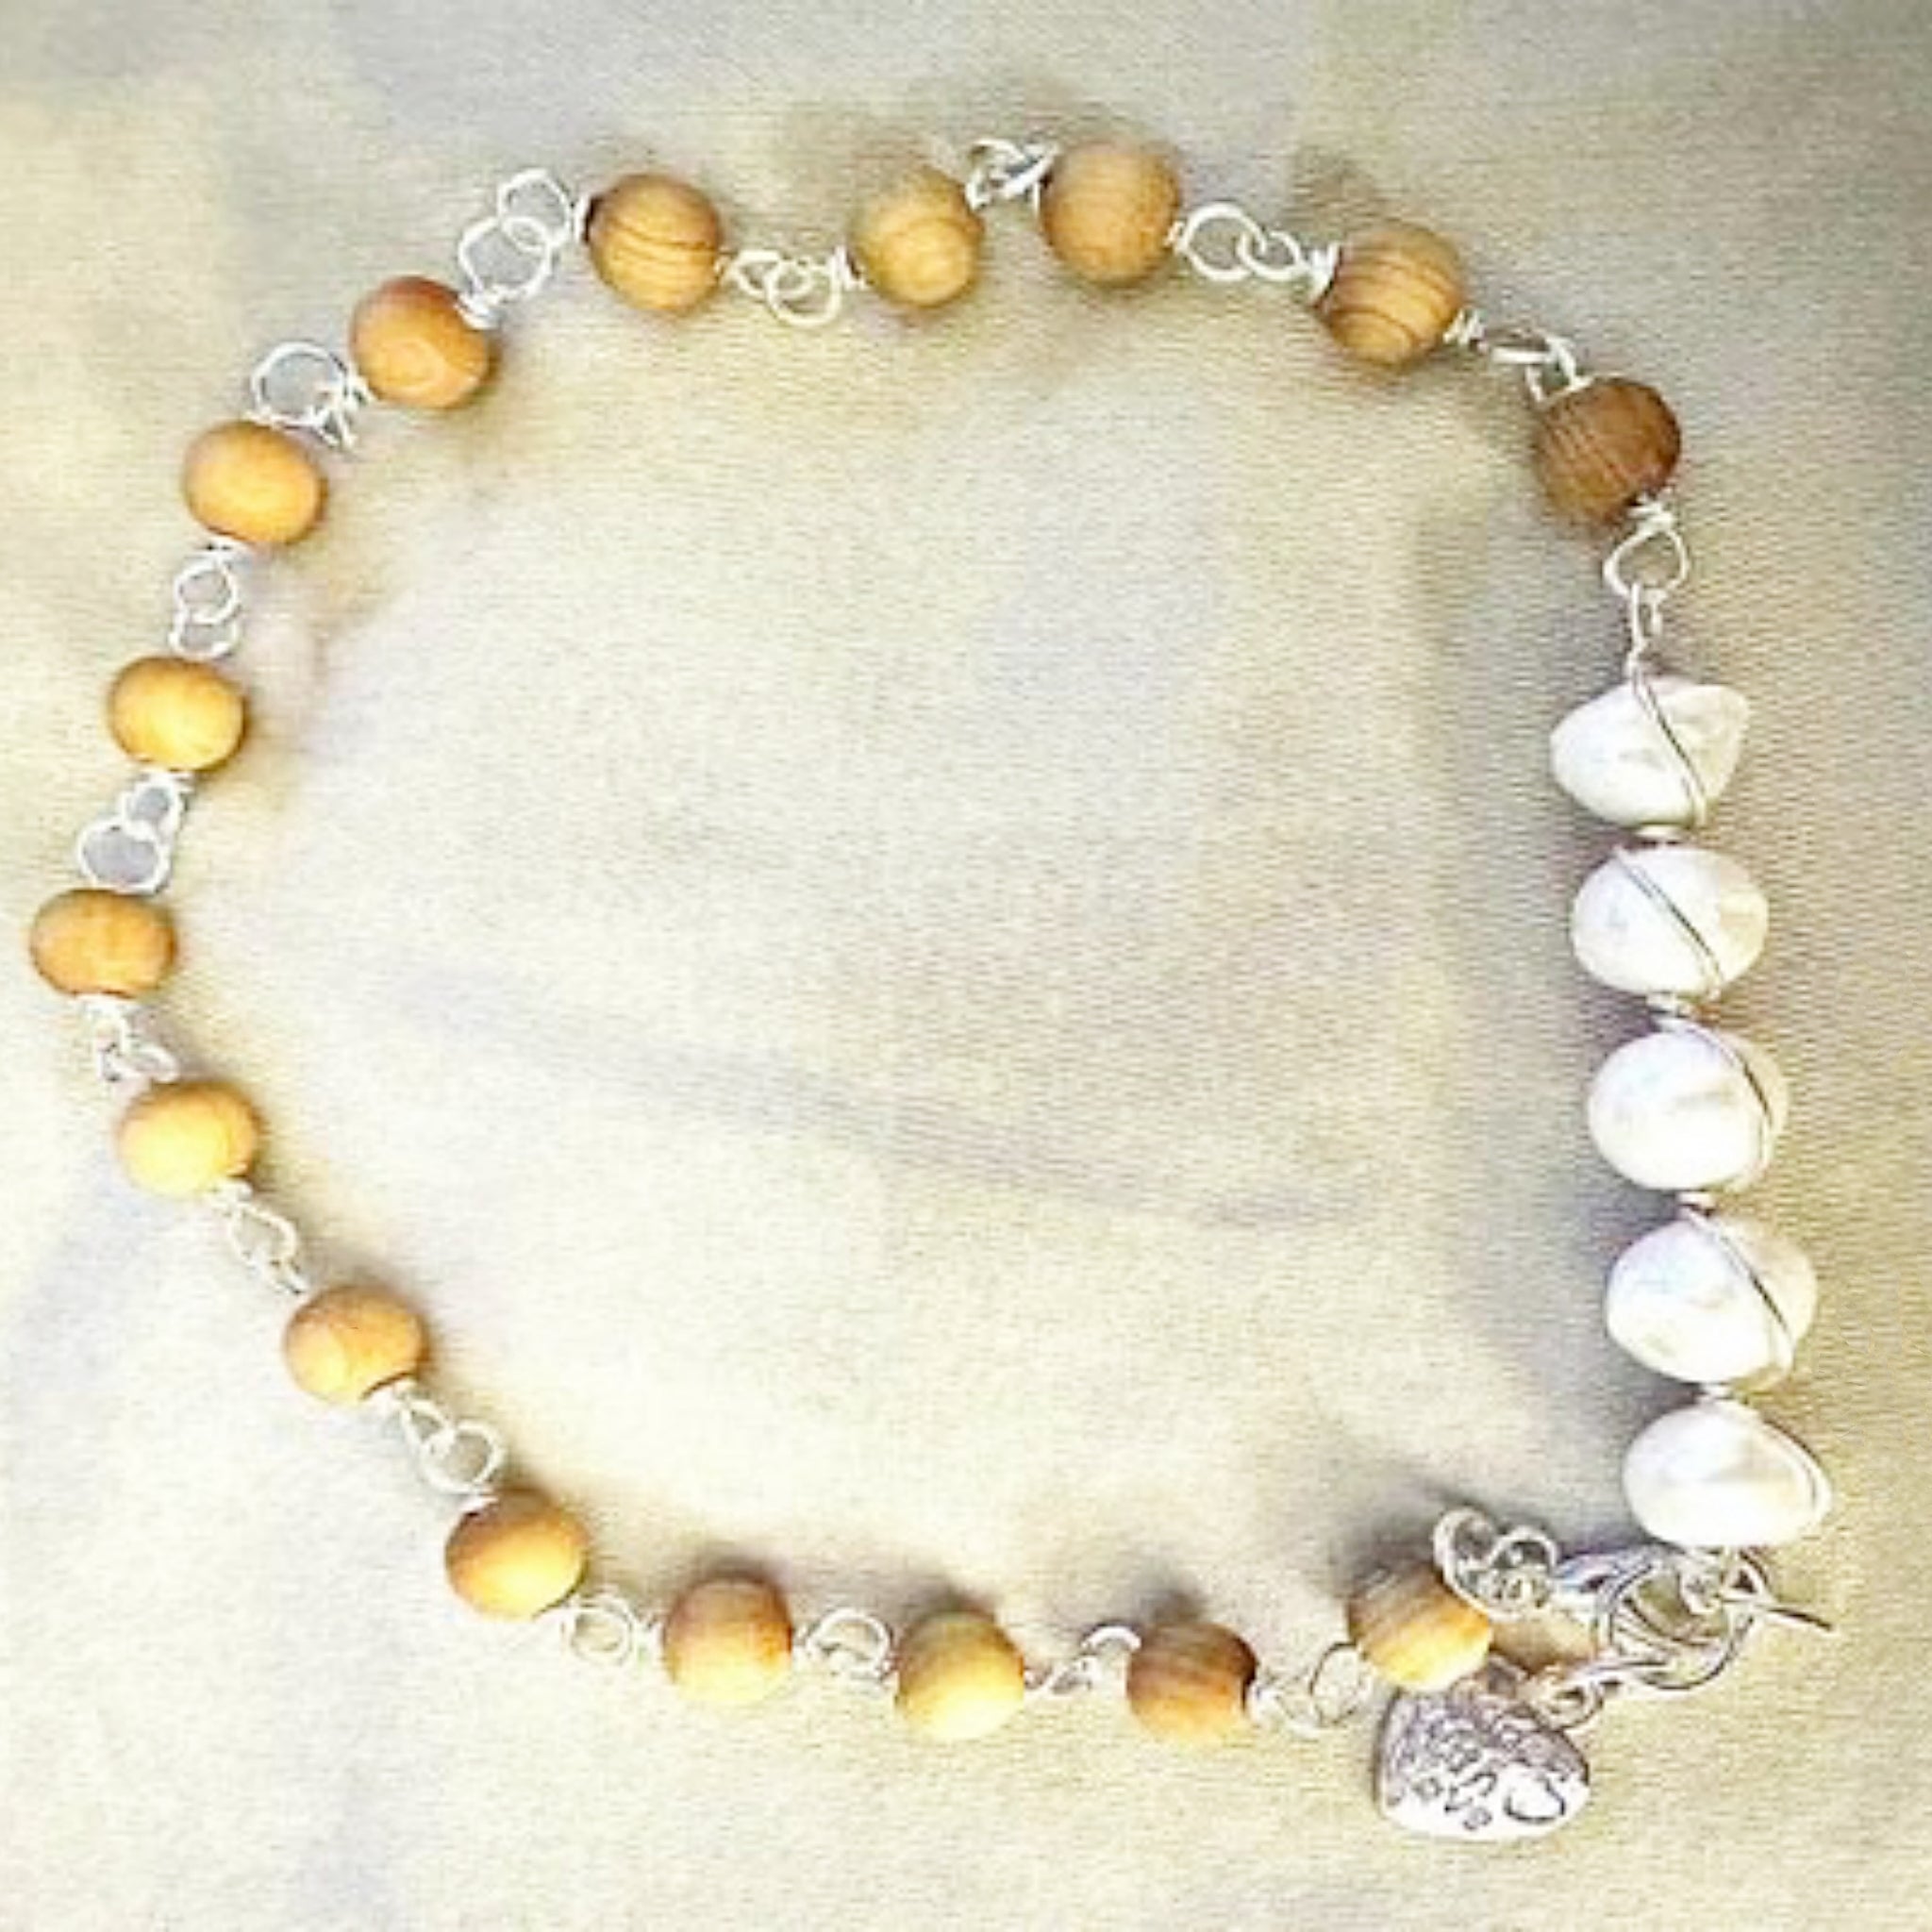 Anklet | Sandalwood and Freshwater Pearls